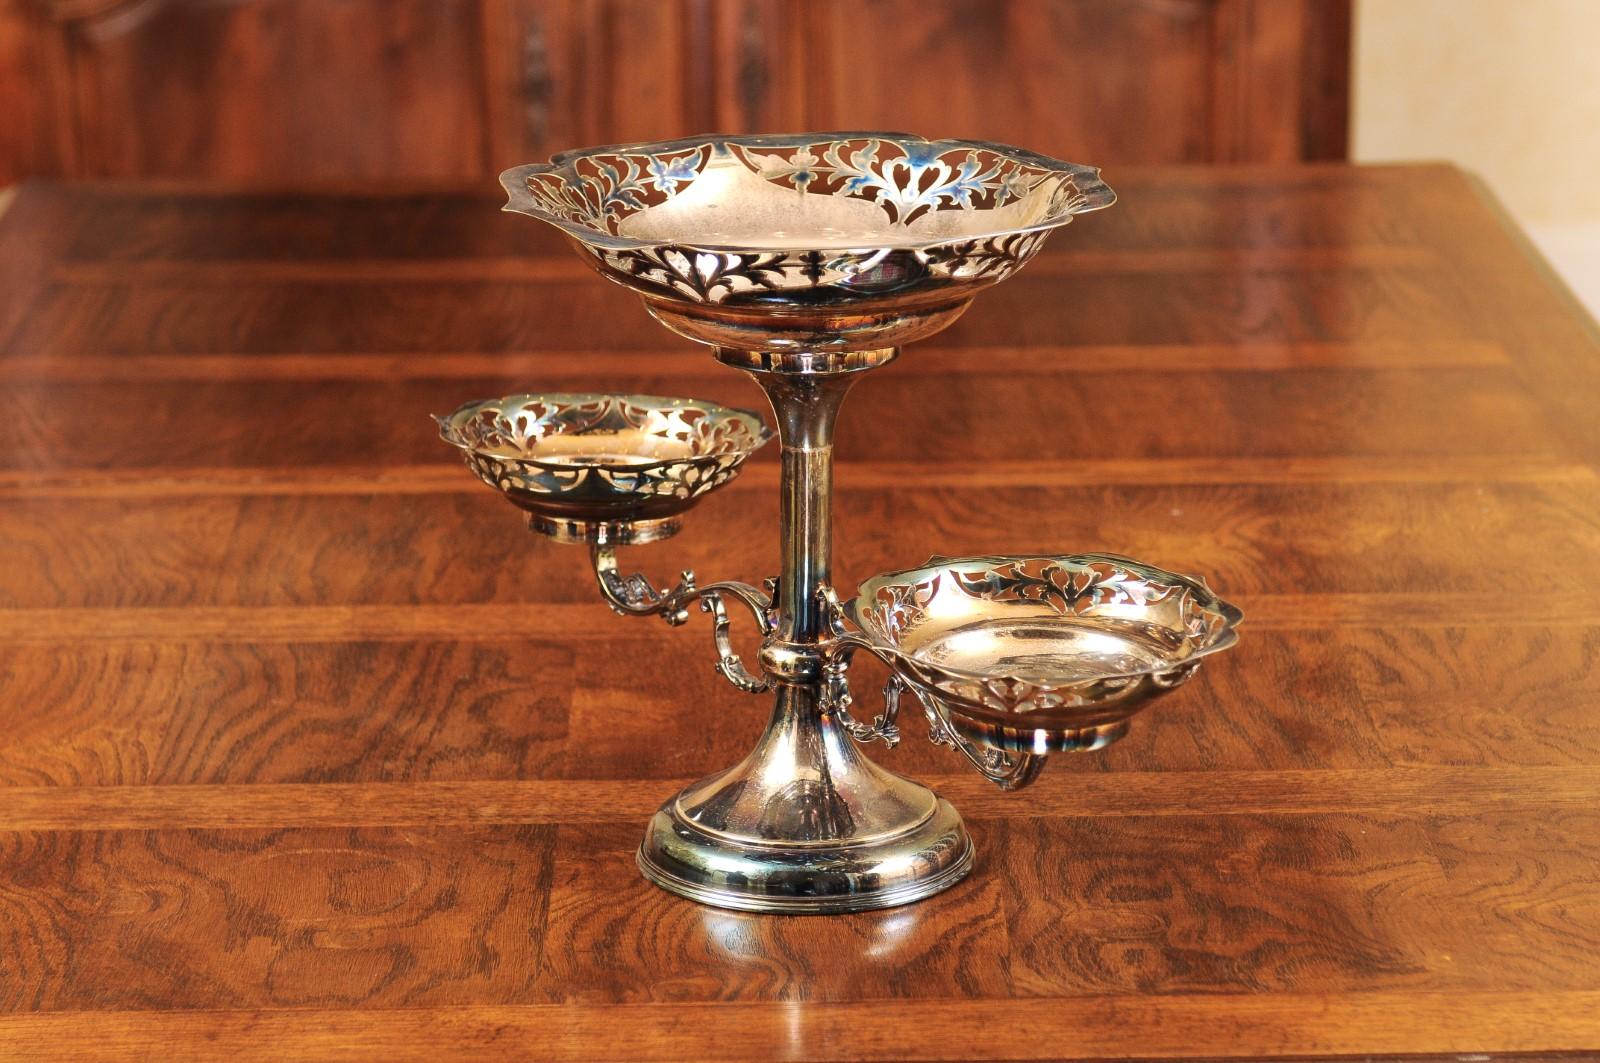 French 19th Century Silver Epergne with Pierced Foliage and Scrolling Motifs For Sale 4